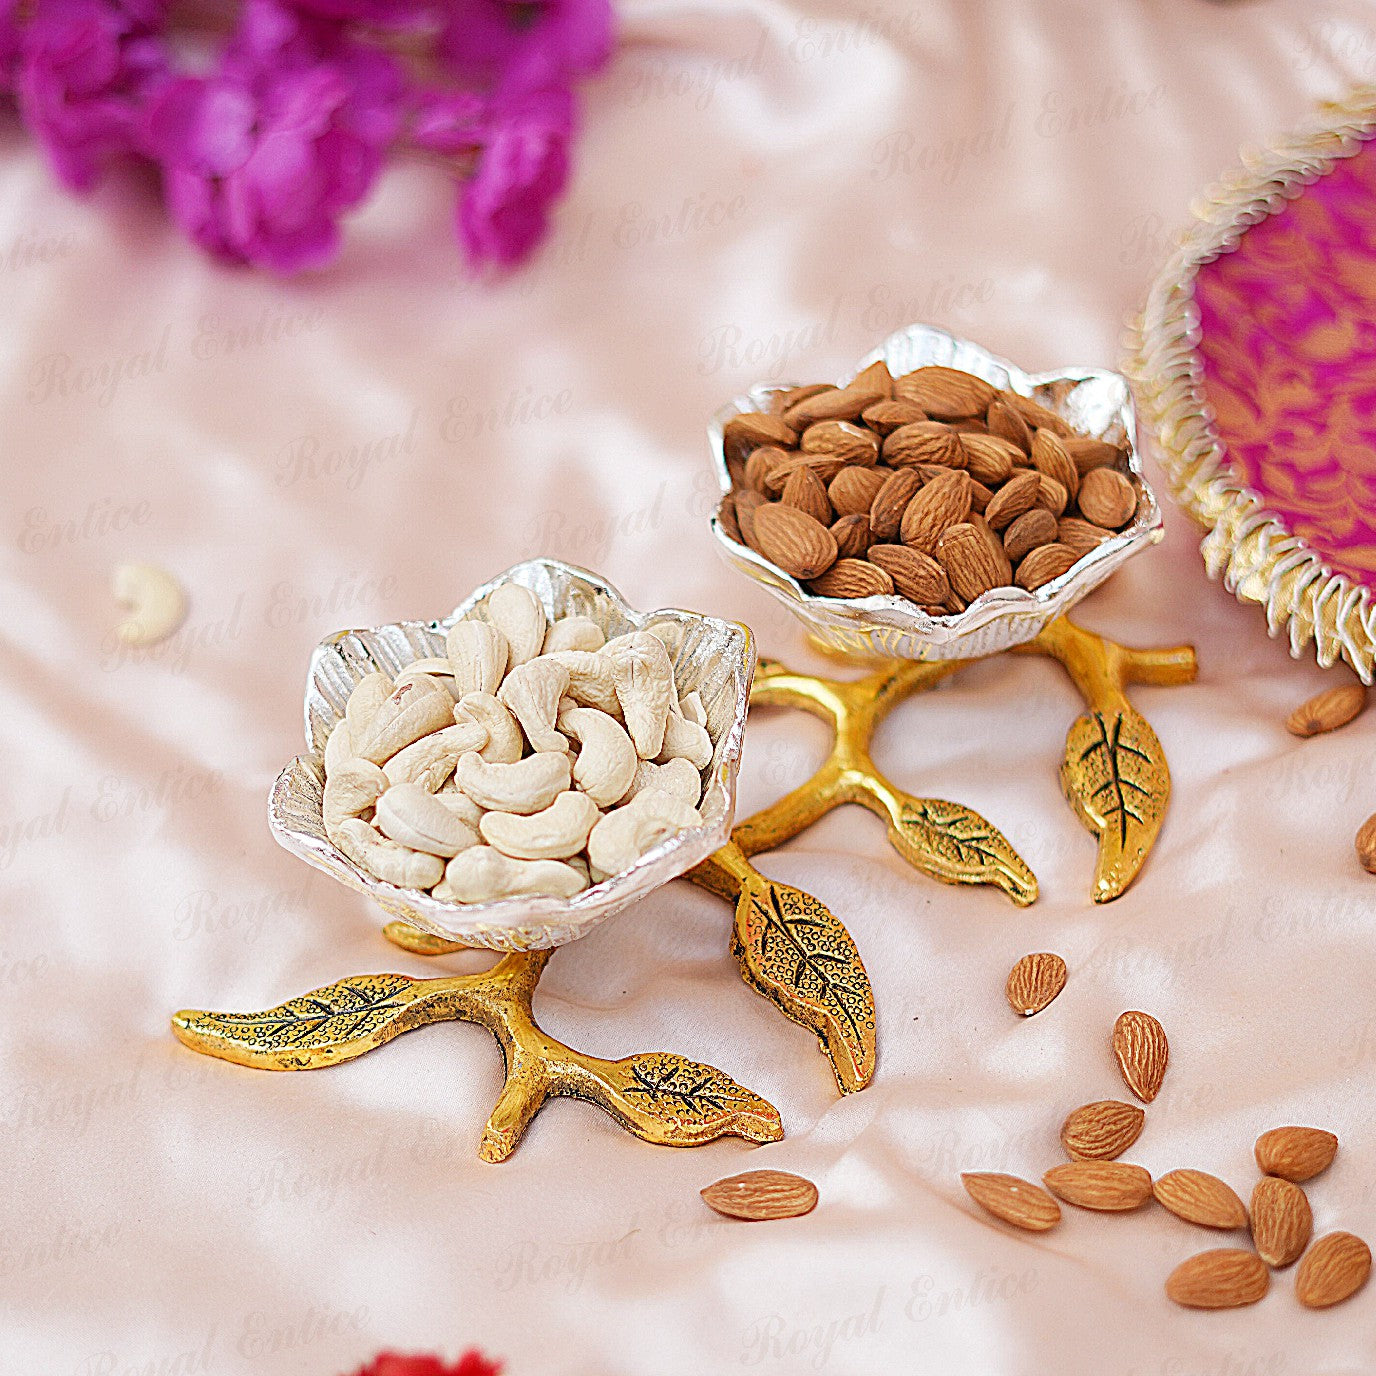 Gracious Dryfruit serving Tray